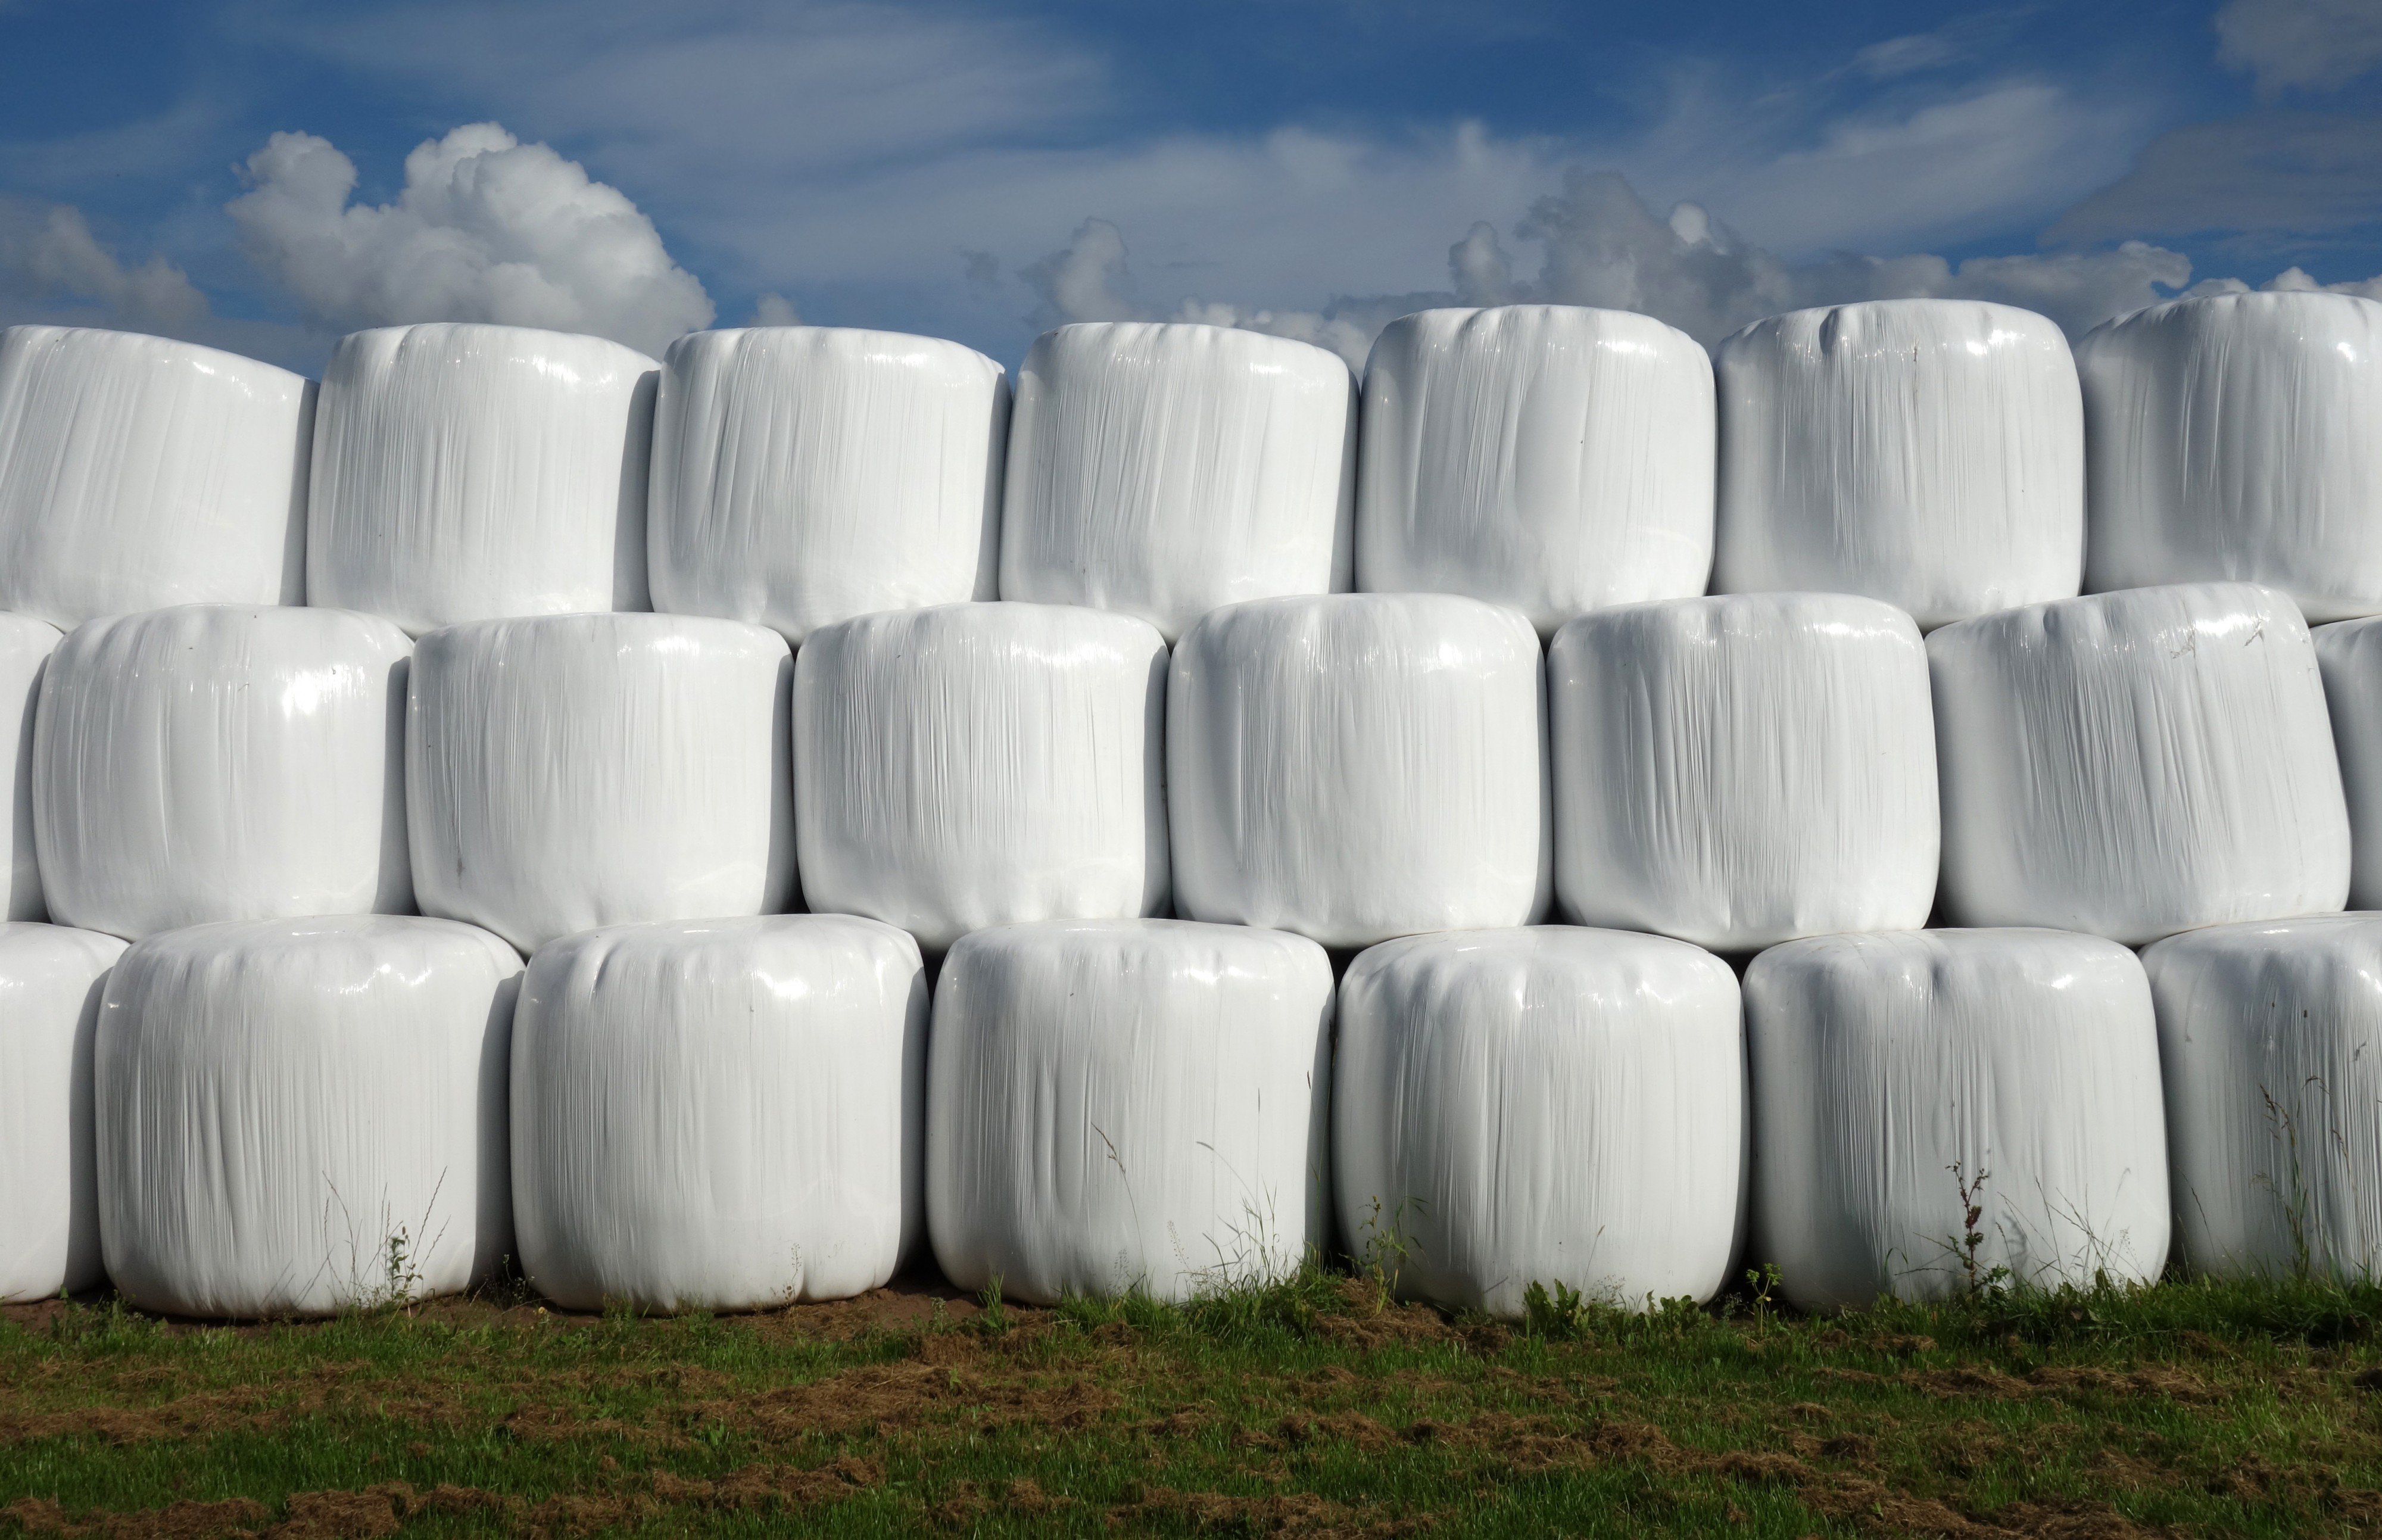 Three tiers of silage bales